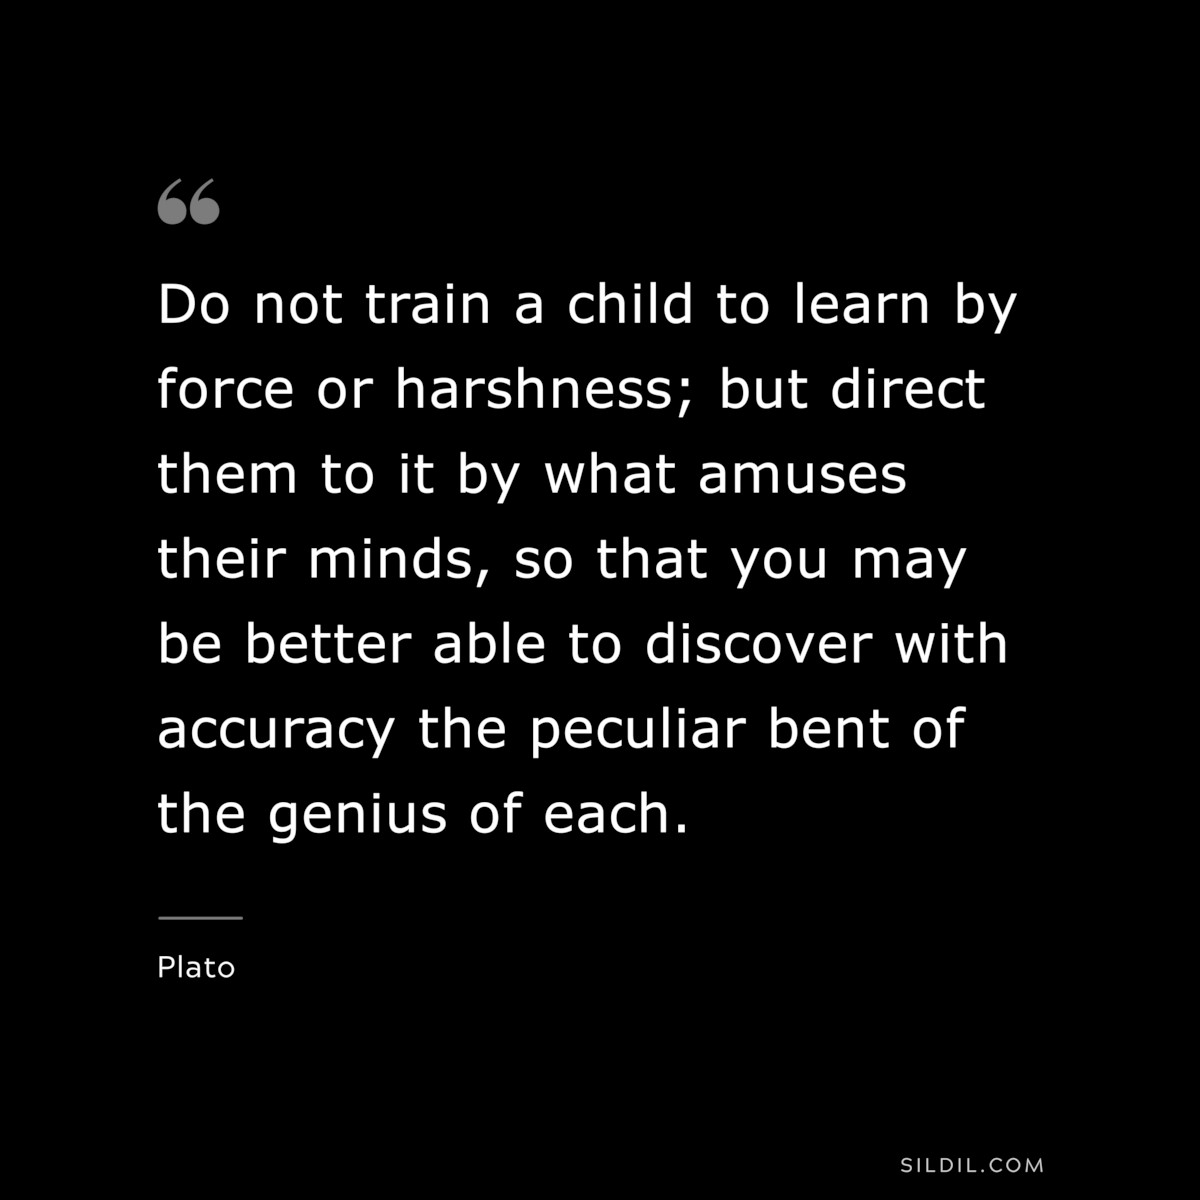 Do not train a child to learn by force or harshness; but direct them to it by what amuses their minds, so that you may be better able to discover with accuracy the peculiar bent of the genius of each. ― Plato